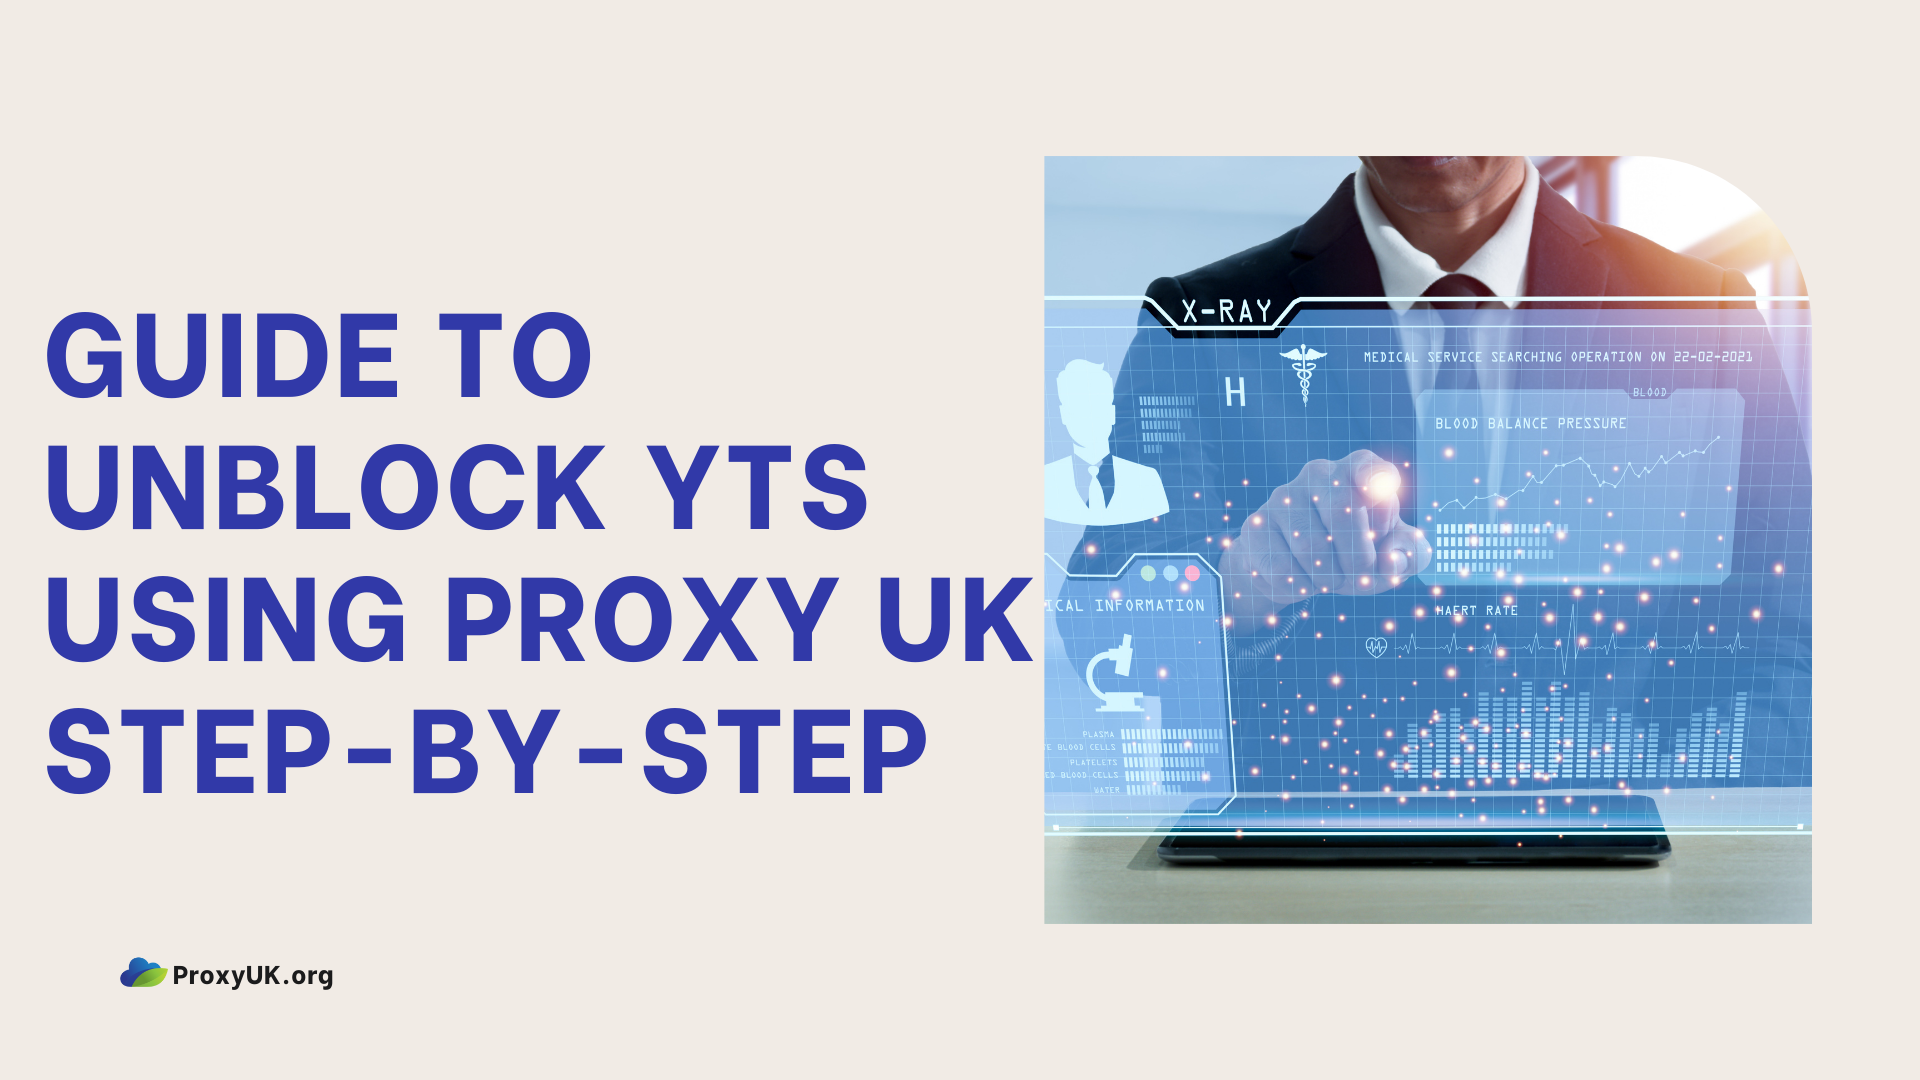 Guide to unblock YTS using Proxy UK Step-by-step